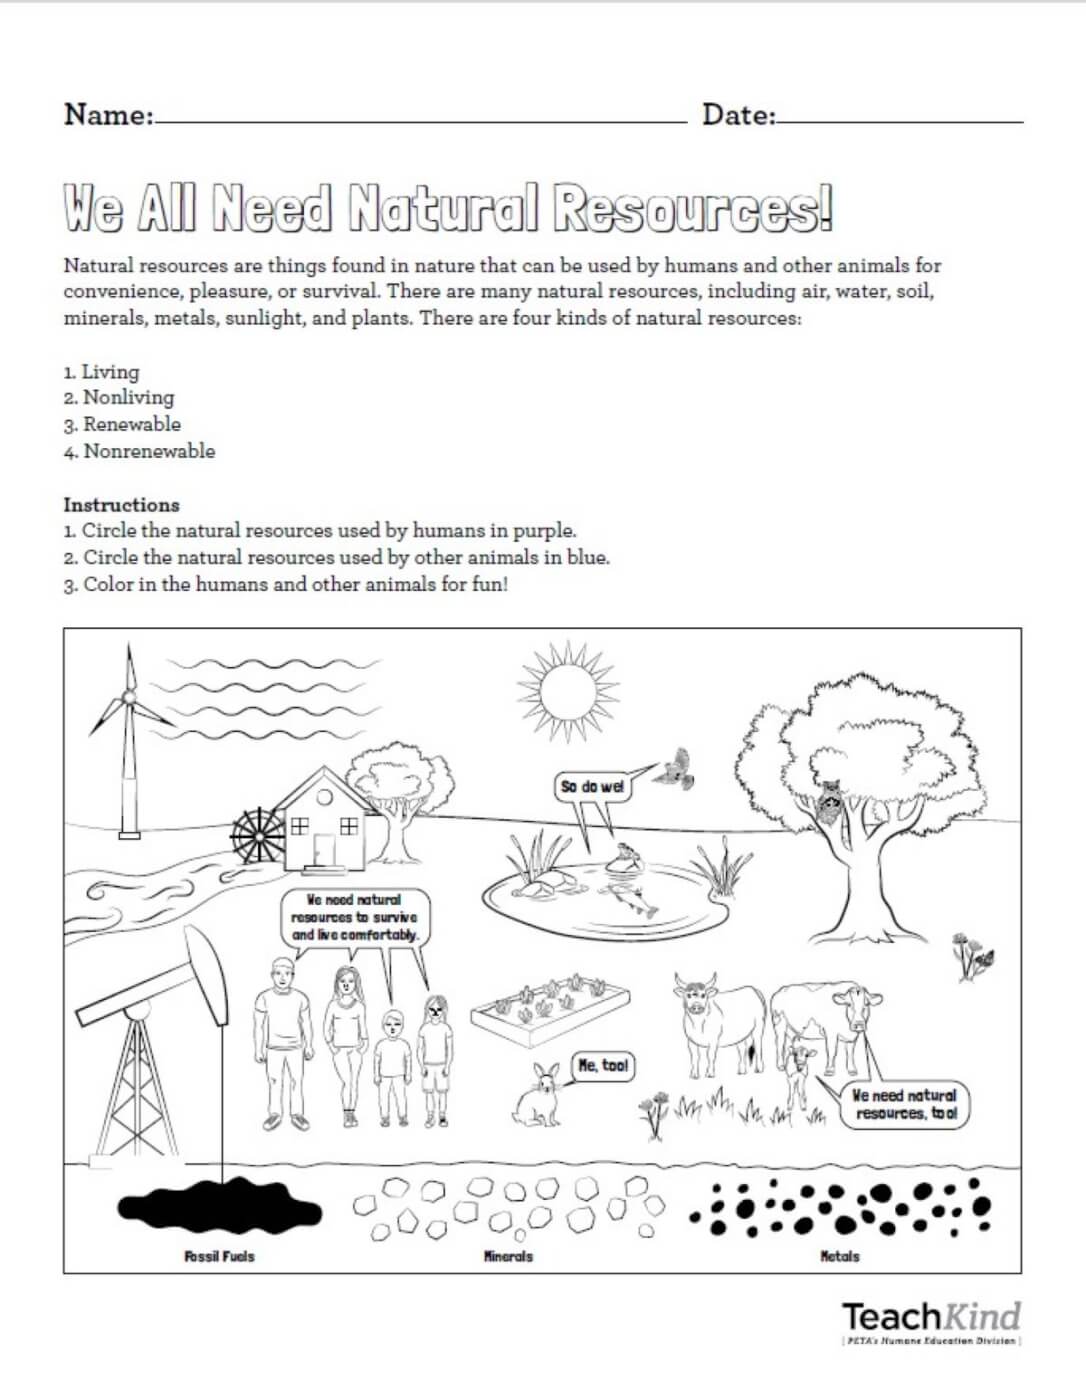 NR lesson Natural Resources Lesson With an Animal-Friendly Message